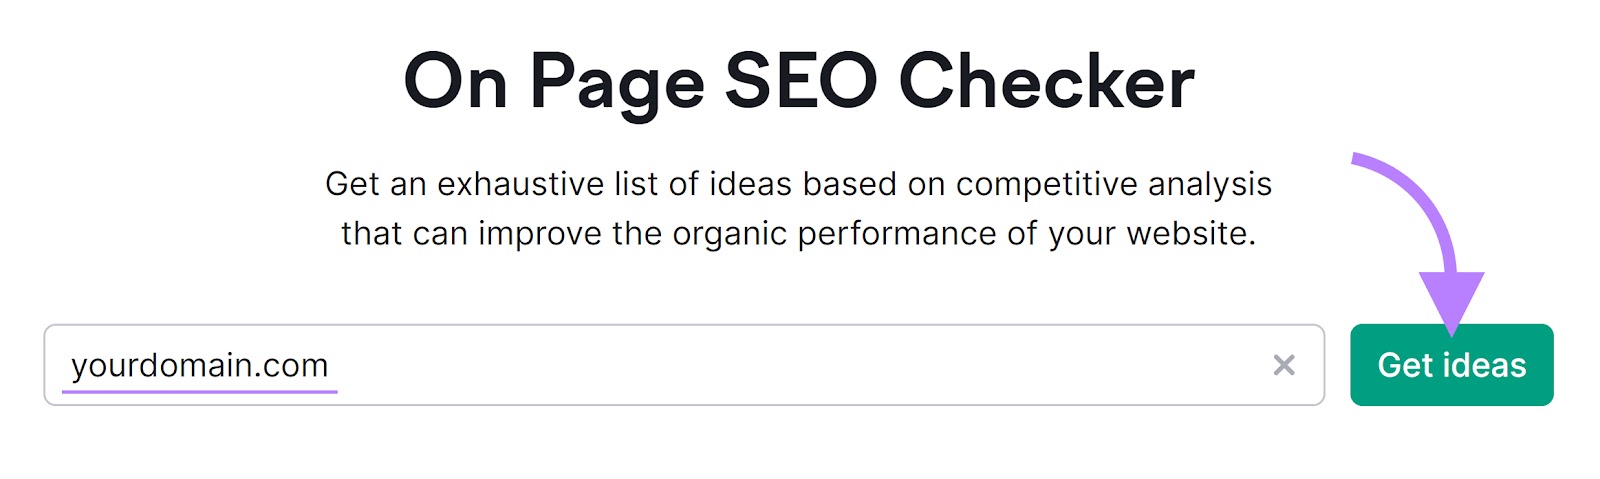 On Page SEO Checker tool with "yourdomain.com" in the search field and an arrow pointing to the "Get ideas" button.